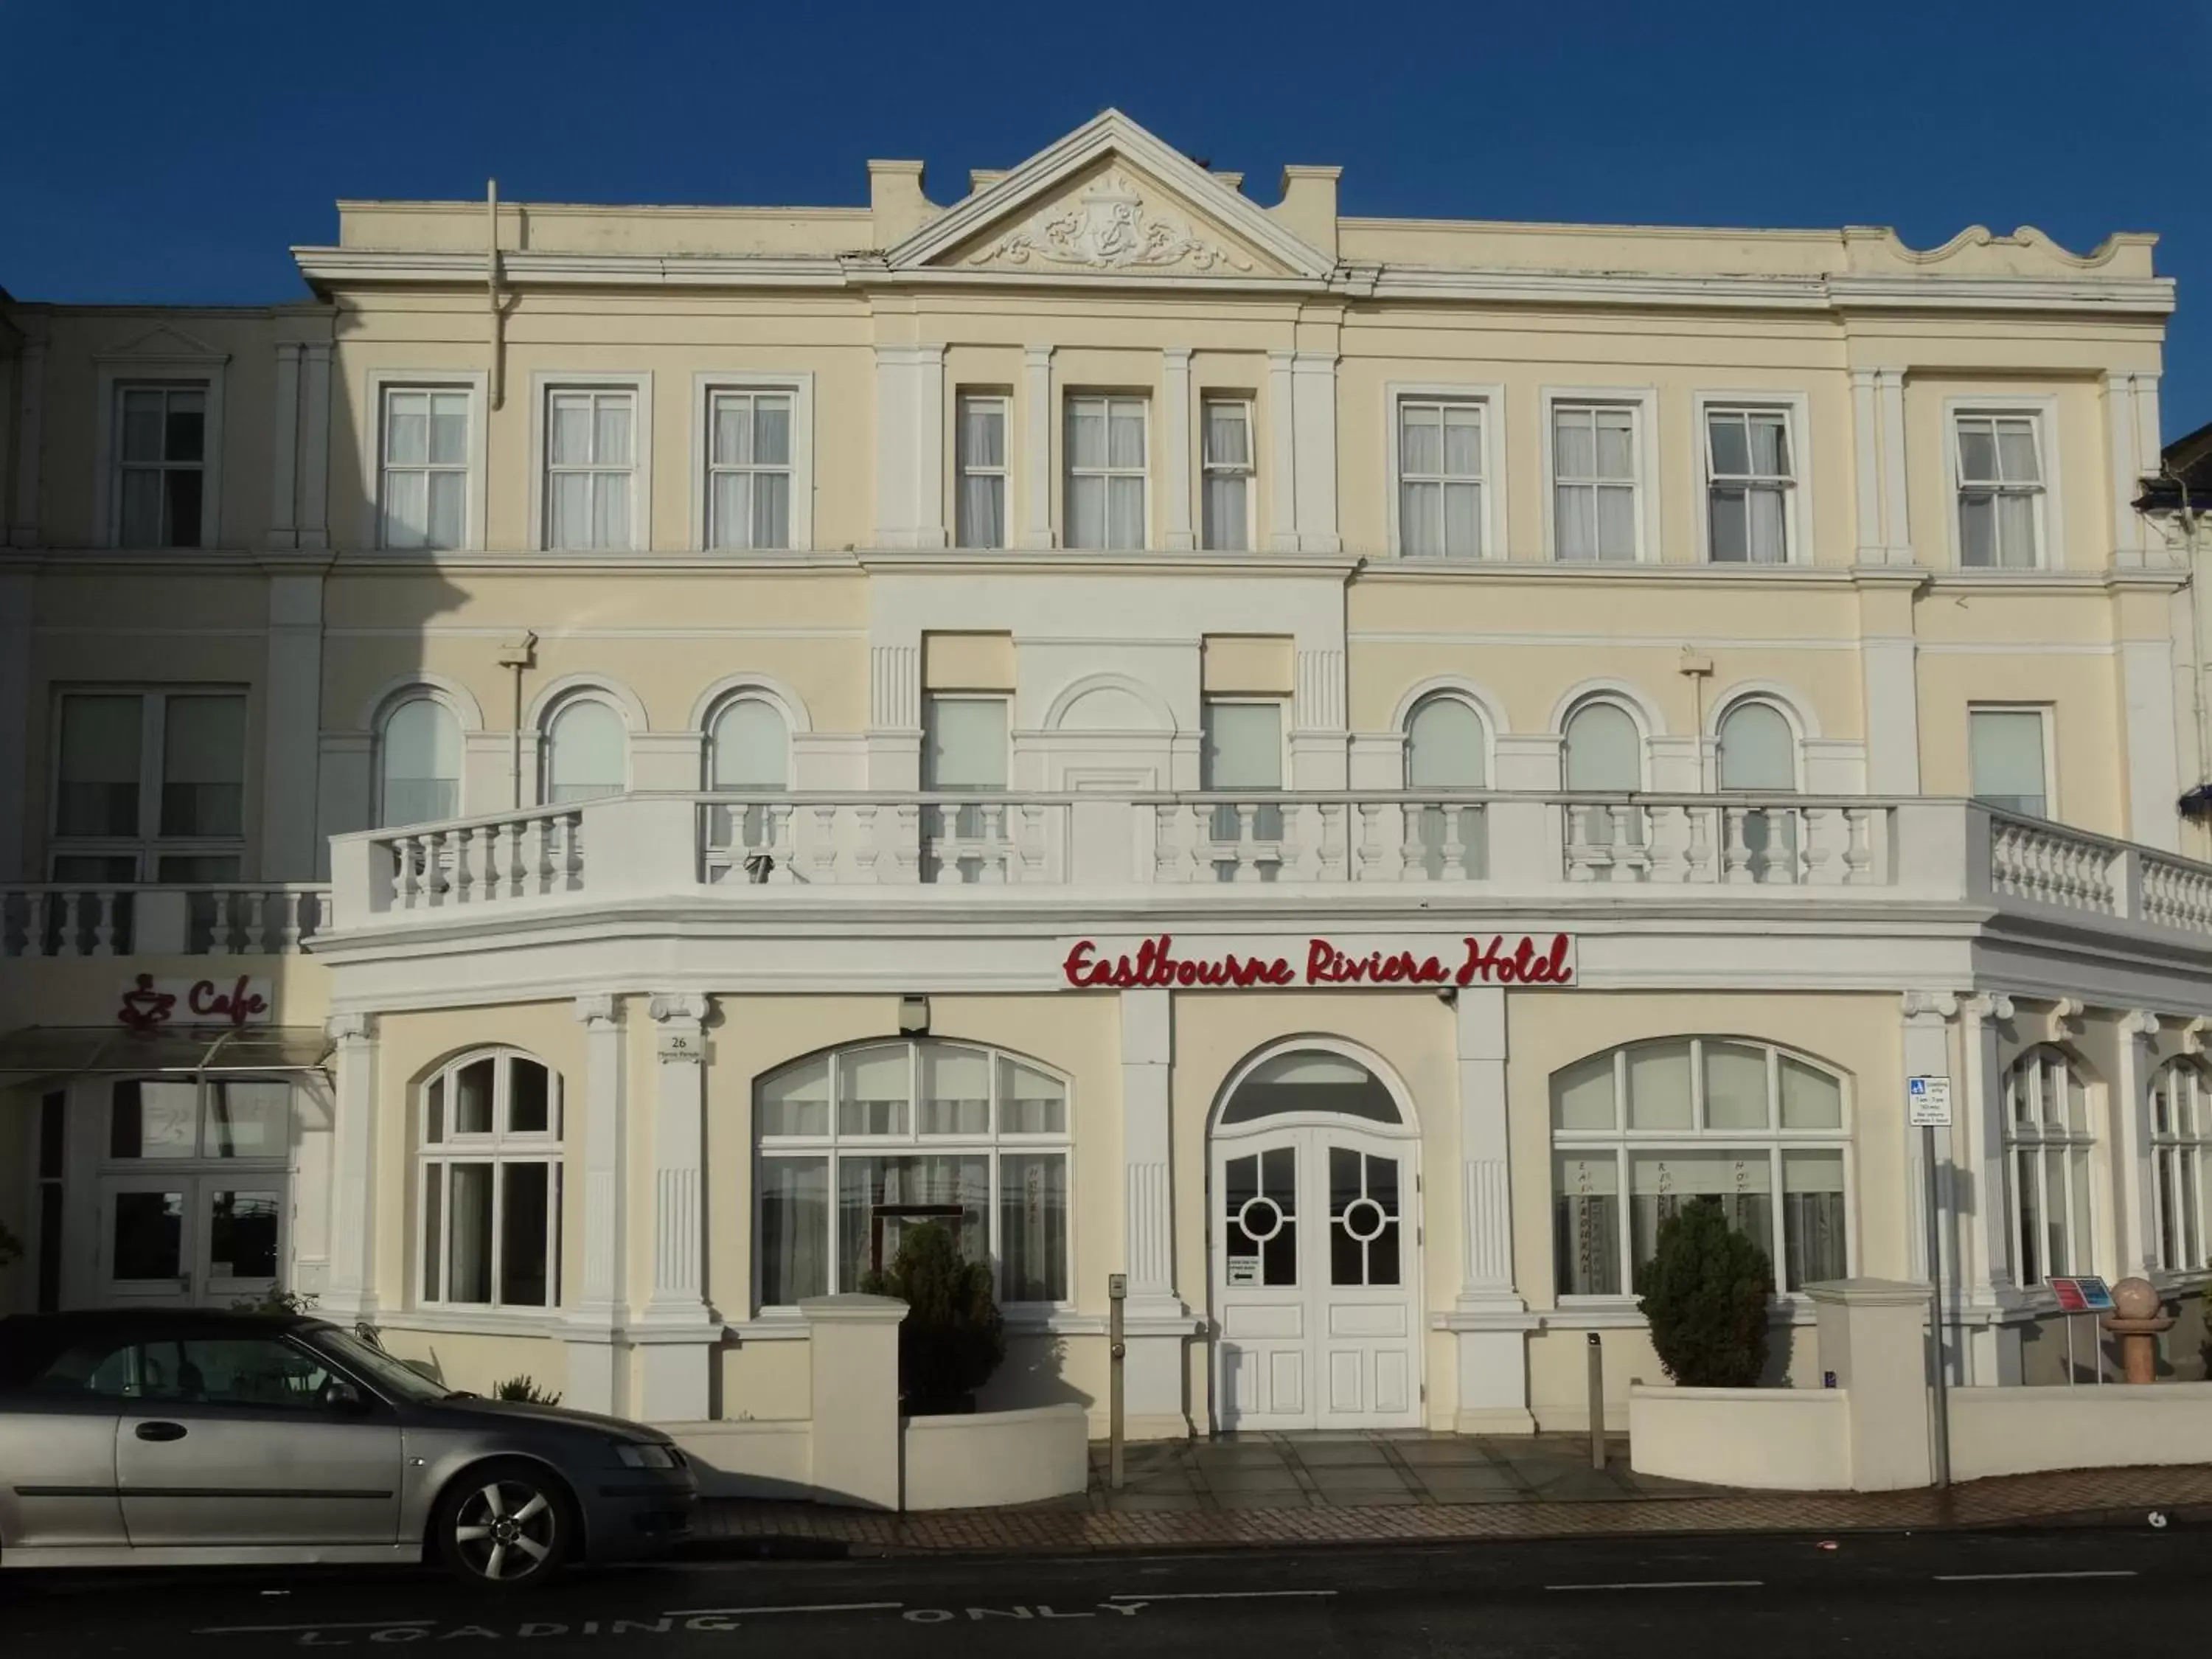 Property building in Eastbourne Riviera Hotel